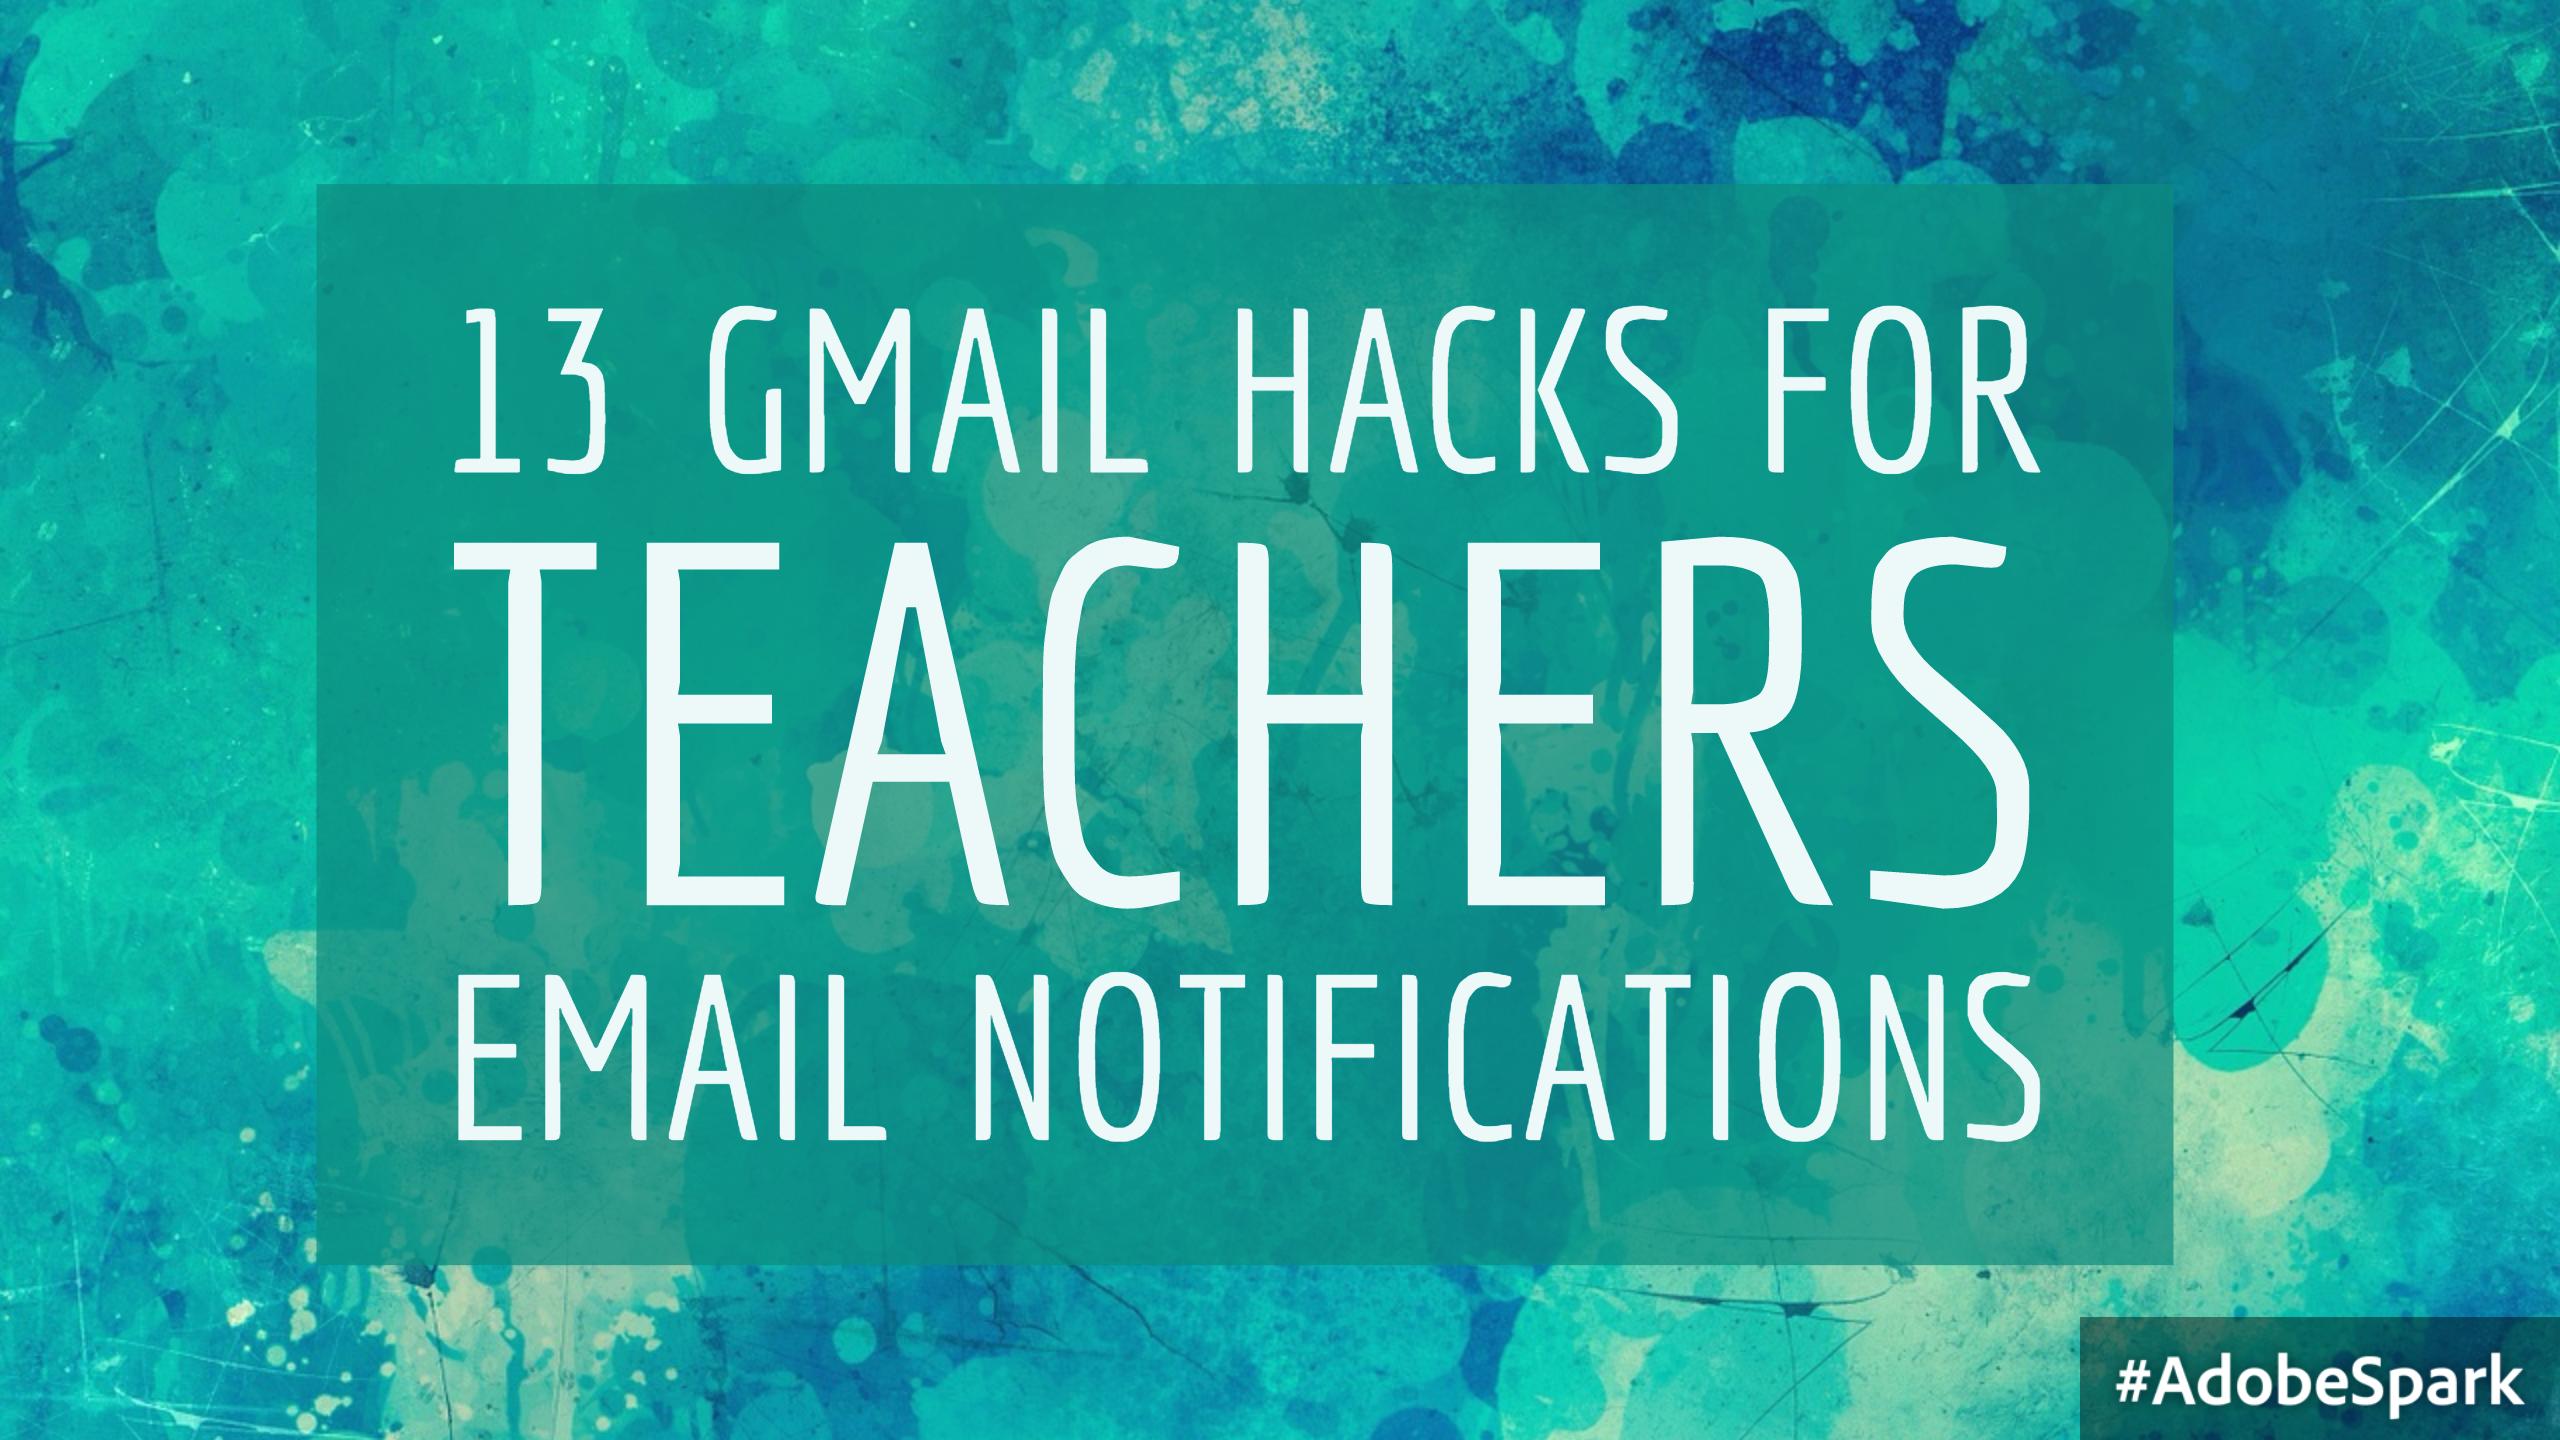 8. Email notifications  (from 13 Gmail hacks for teachers – http://u.eduk8.me/13gmailhacks)